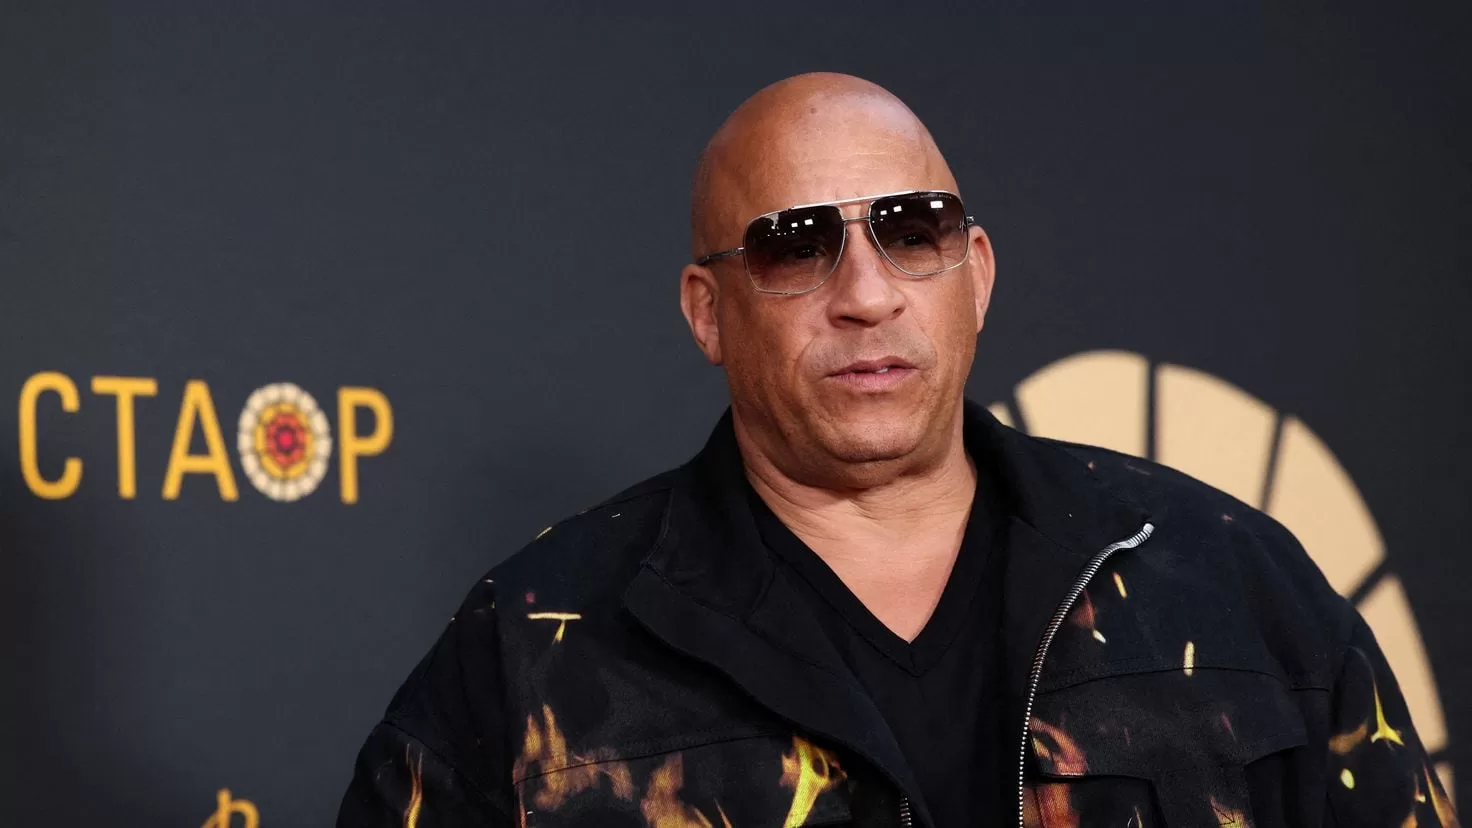 Vin Diesel breaks his silence after being accused of sexual assault on the set of Fast & Furious
